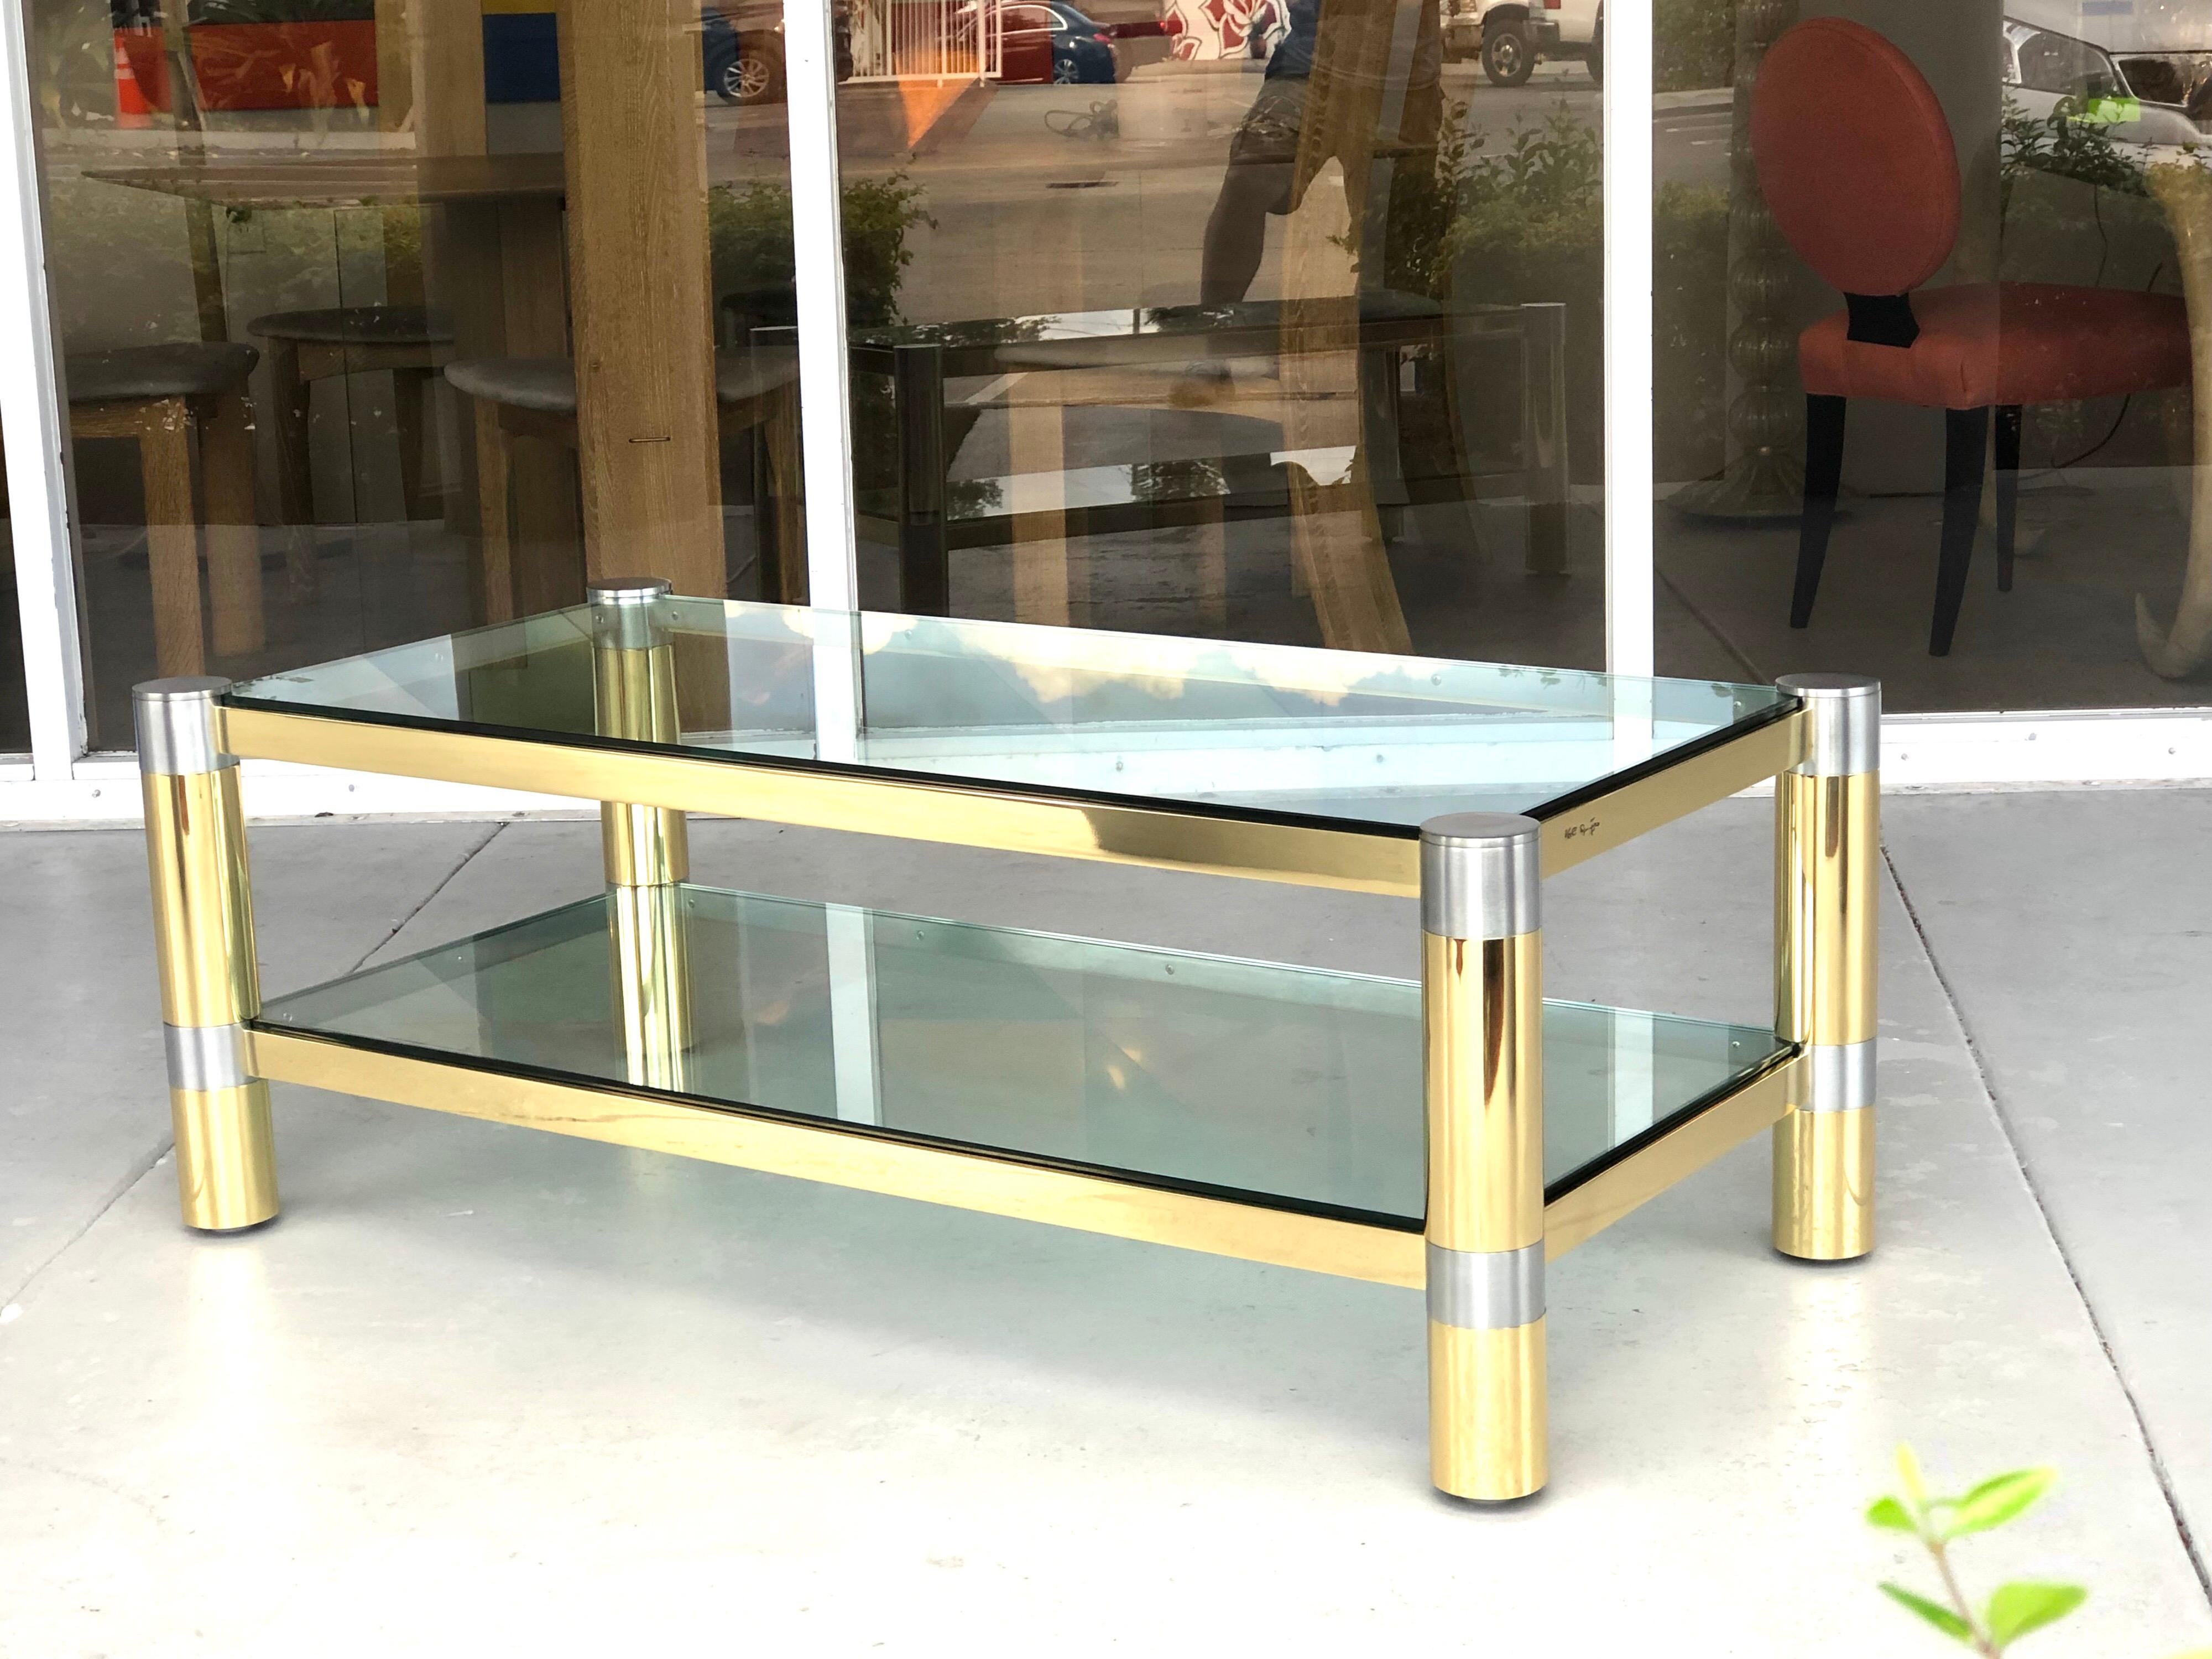 A polished brass and brushed steel coffee table by Karl Springer. The table is a double decker, with 2 thick glass tops.